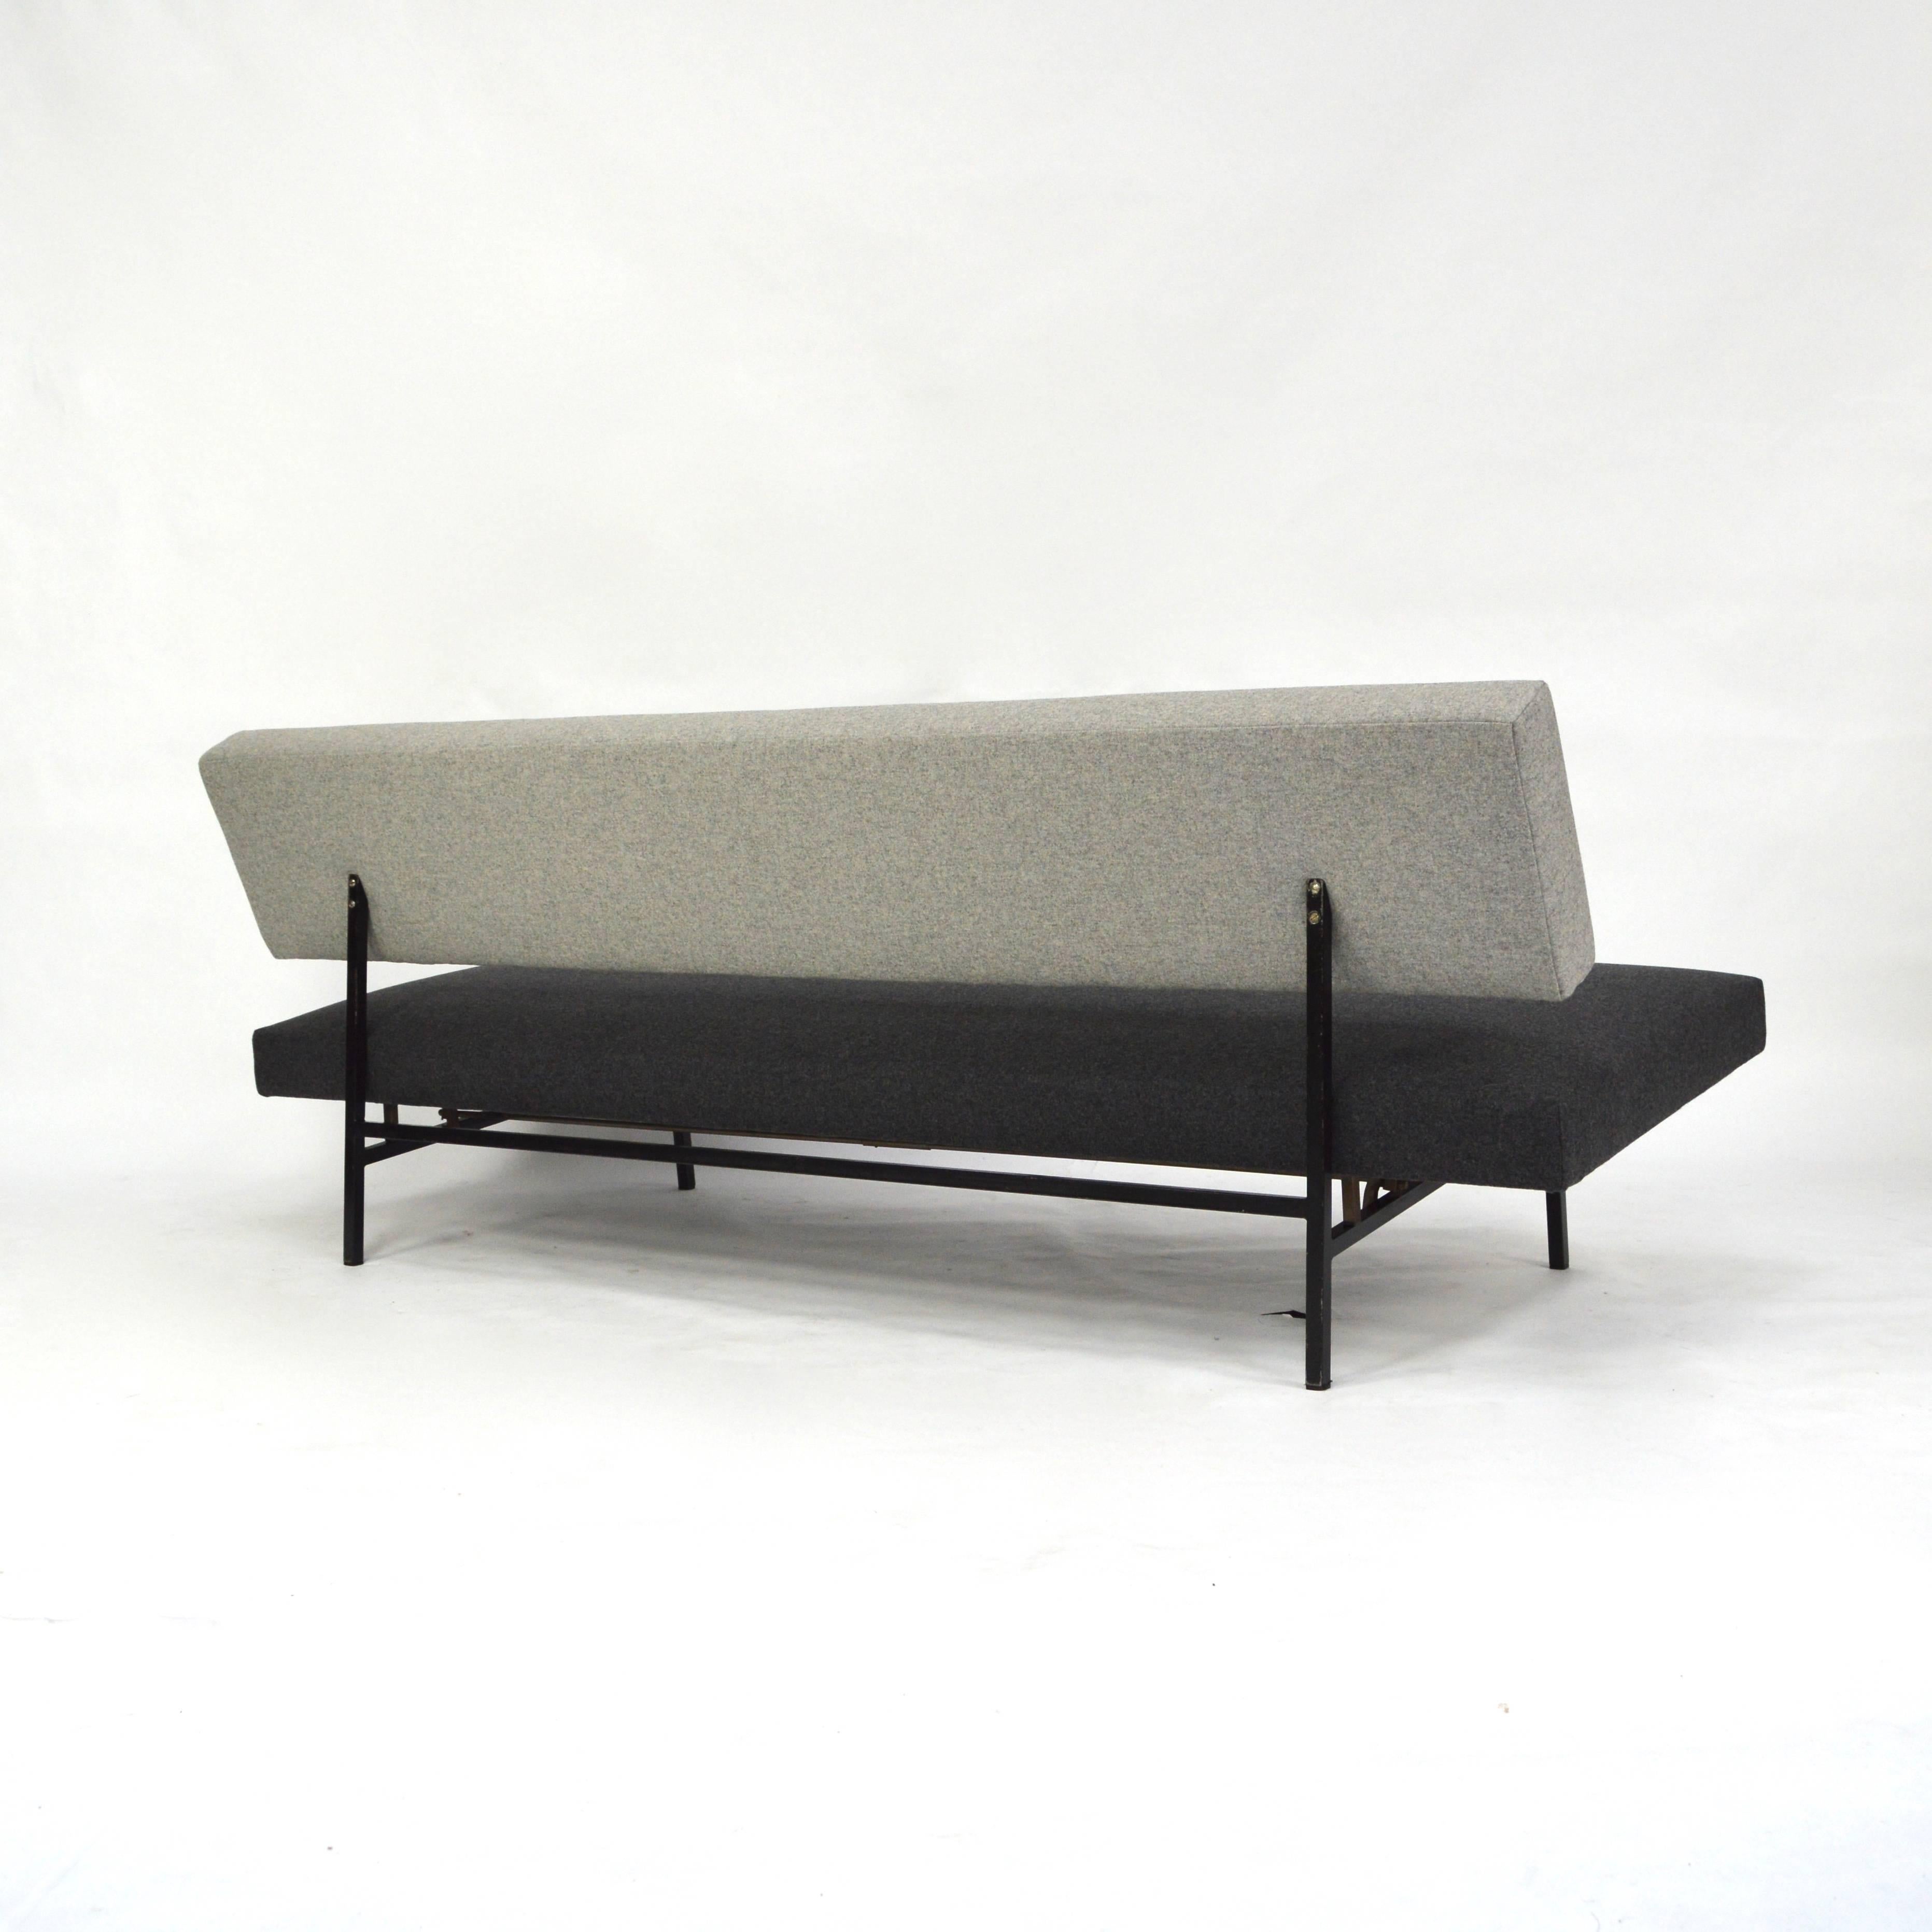 Dutch Minimalistic Sofa Daybed by Rob Parry for Gelderland, 1950s